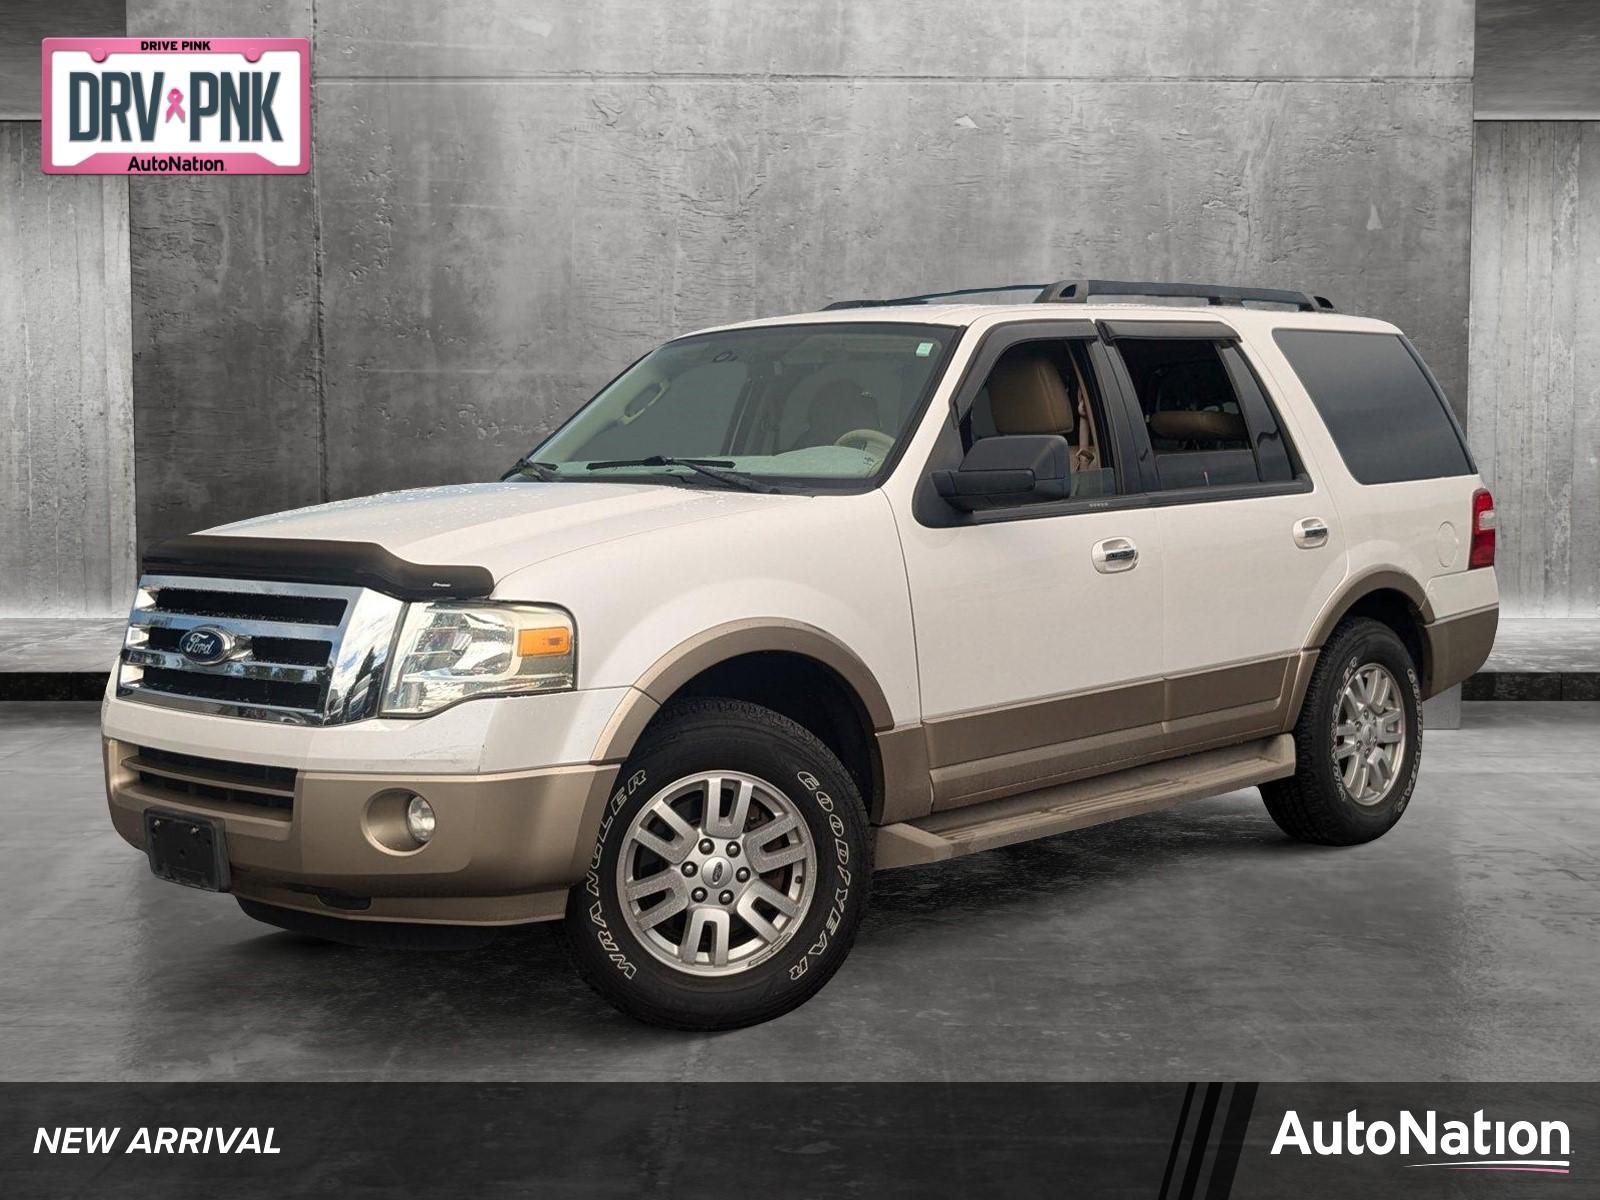 2012 Ford Expedition Vehicle Photo in St. Petersburg, FL 33713